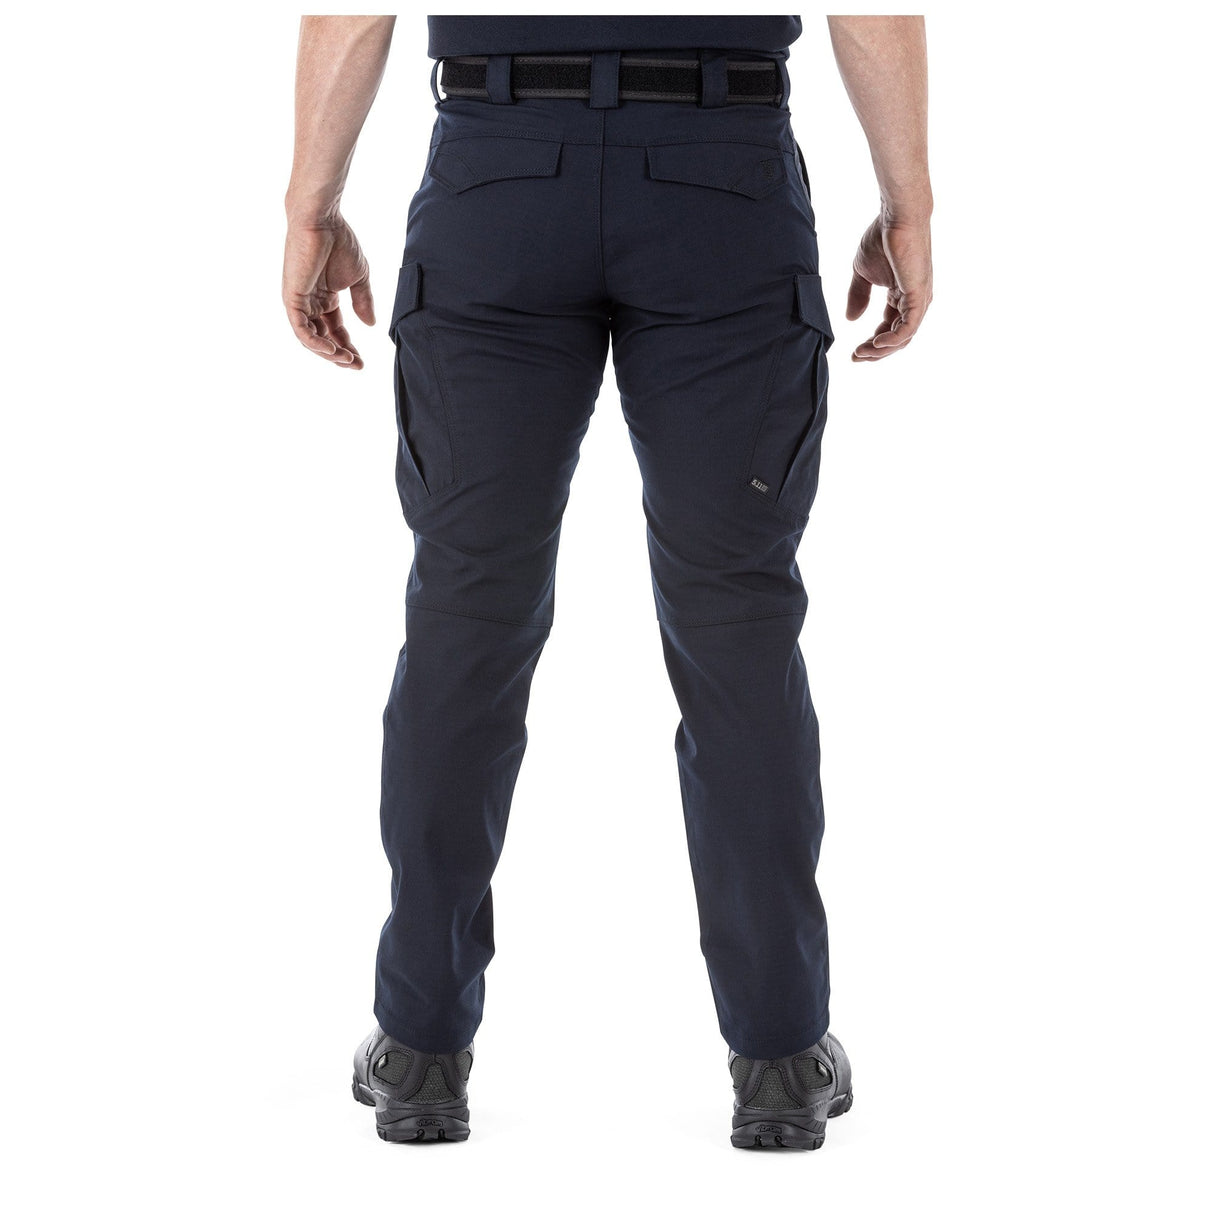 ICON PANT DARK NAVY - 5.11 Tactical Finland Store